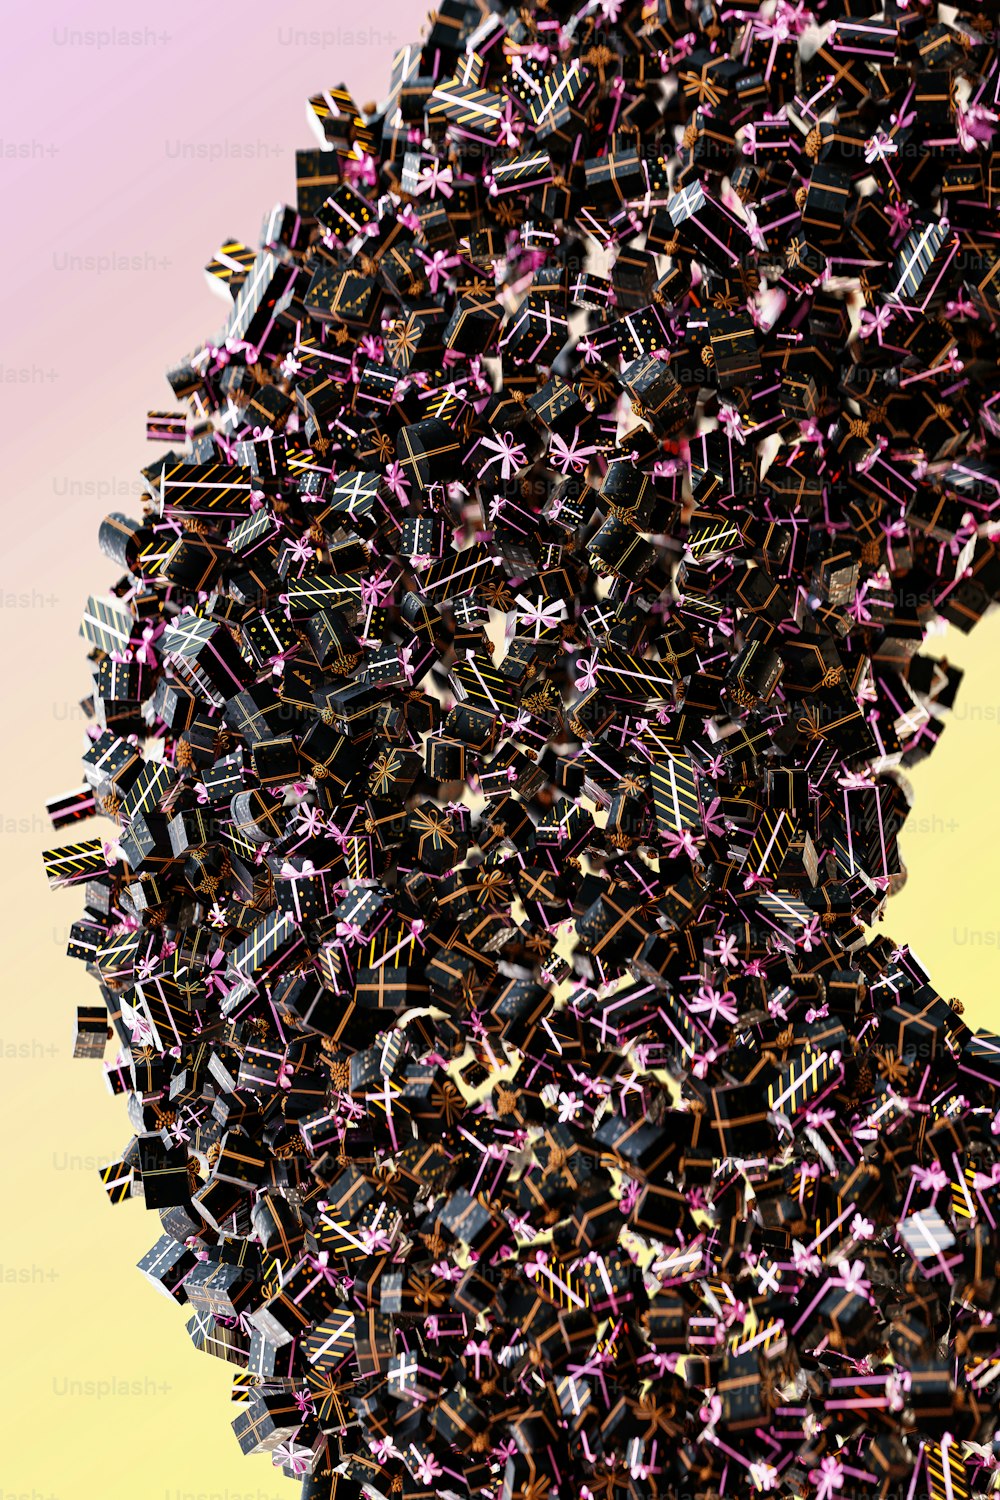 a large number of small objects in the shape of a person's head